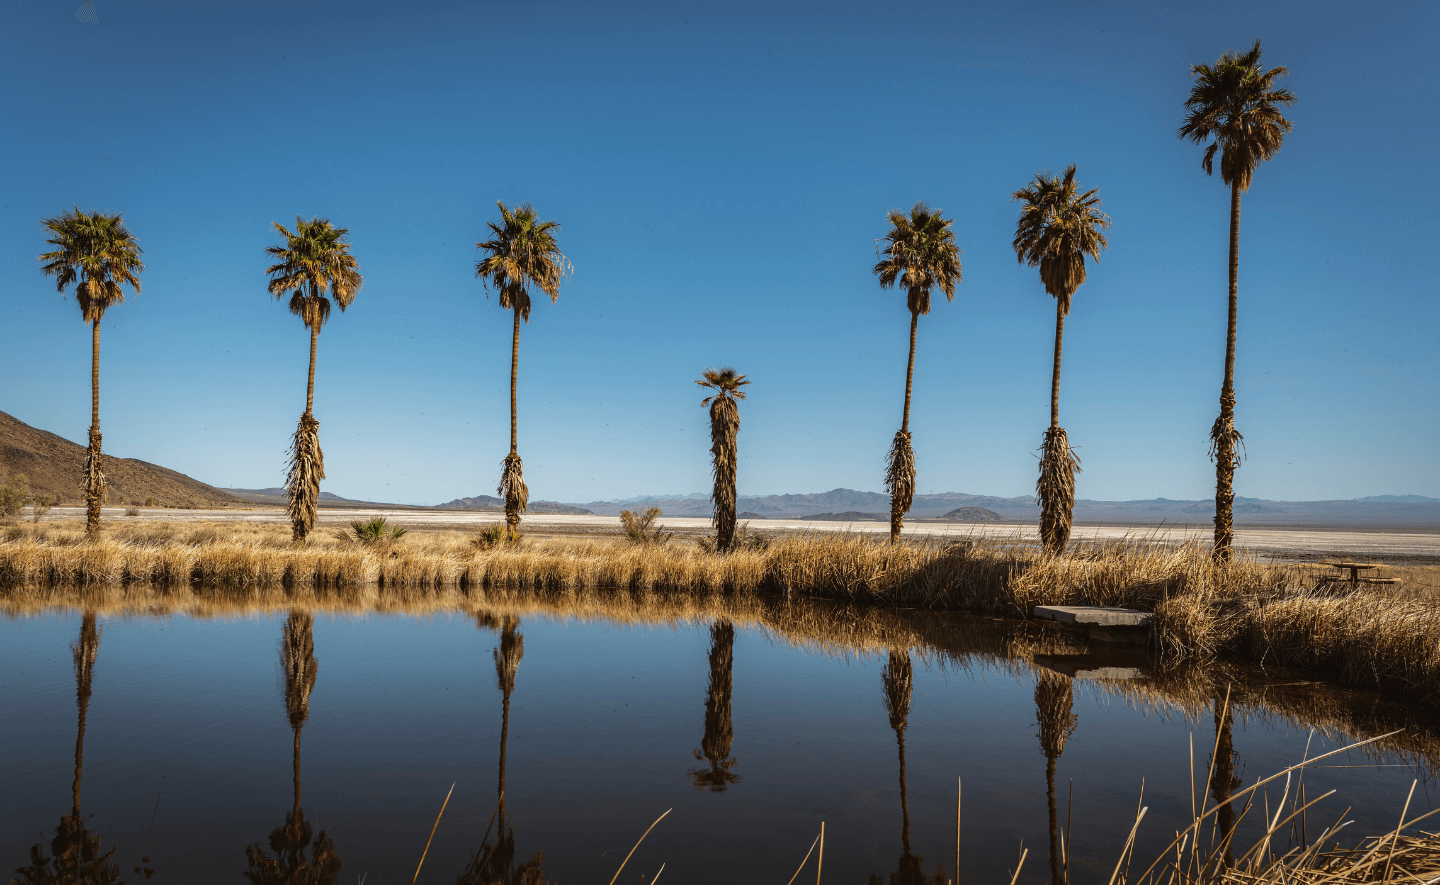 Six palm trees in Mojave Desert near a pond